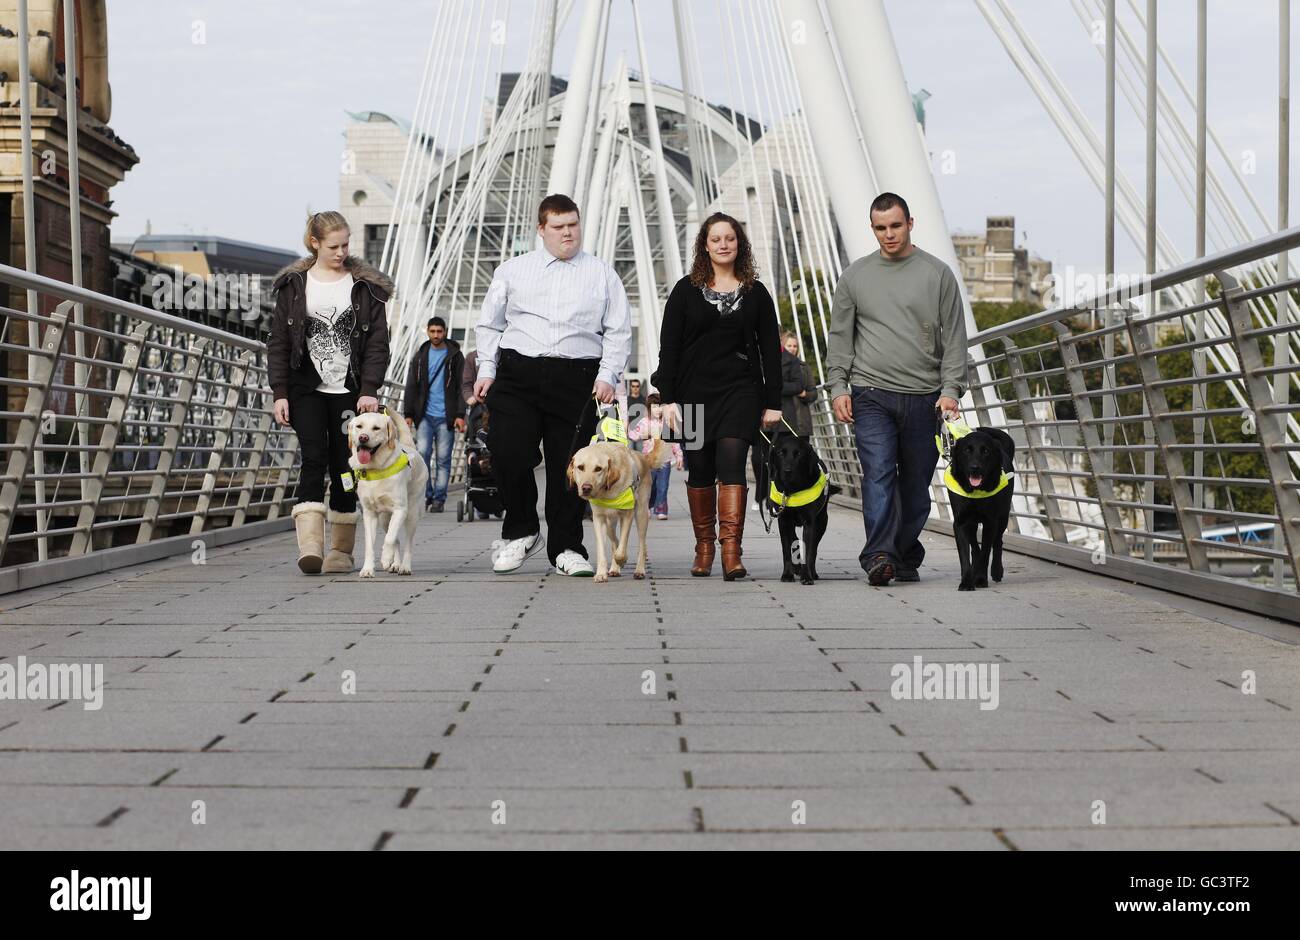 The first four people under sixteen to qualify for a Guide Dog in the UK who were united for the first time on London's Southbank. L-R Kirsty Meinhardt 15 with Websta, Sidney Tamblin 18 with Jamie, Andrea Cooper 18 with Cara and Brad Ranson 16 with Lance. Press Association Photo. Date Sunday 04 October 2009. Over 18,000 blind and partially sighted youngsters are missing out on crucial help with mobility, independence and life skills according to research by Guide Dogs. Picture Credit should read David Parry/ PA Stock Photo